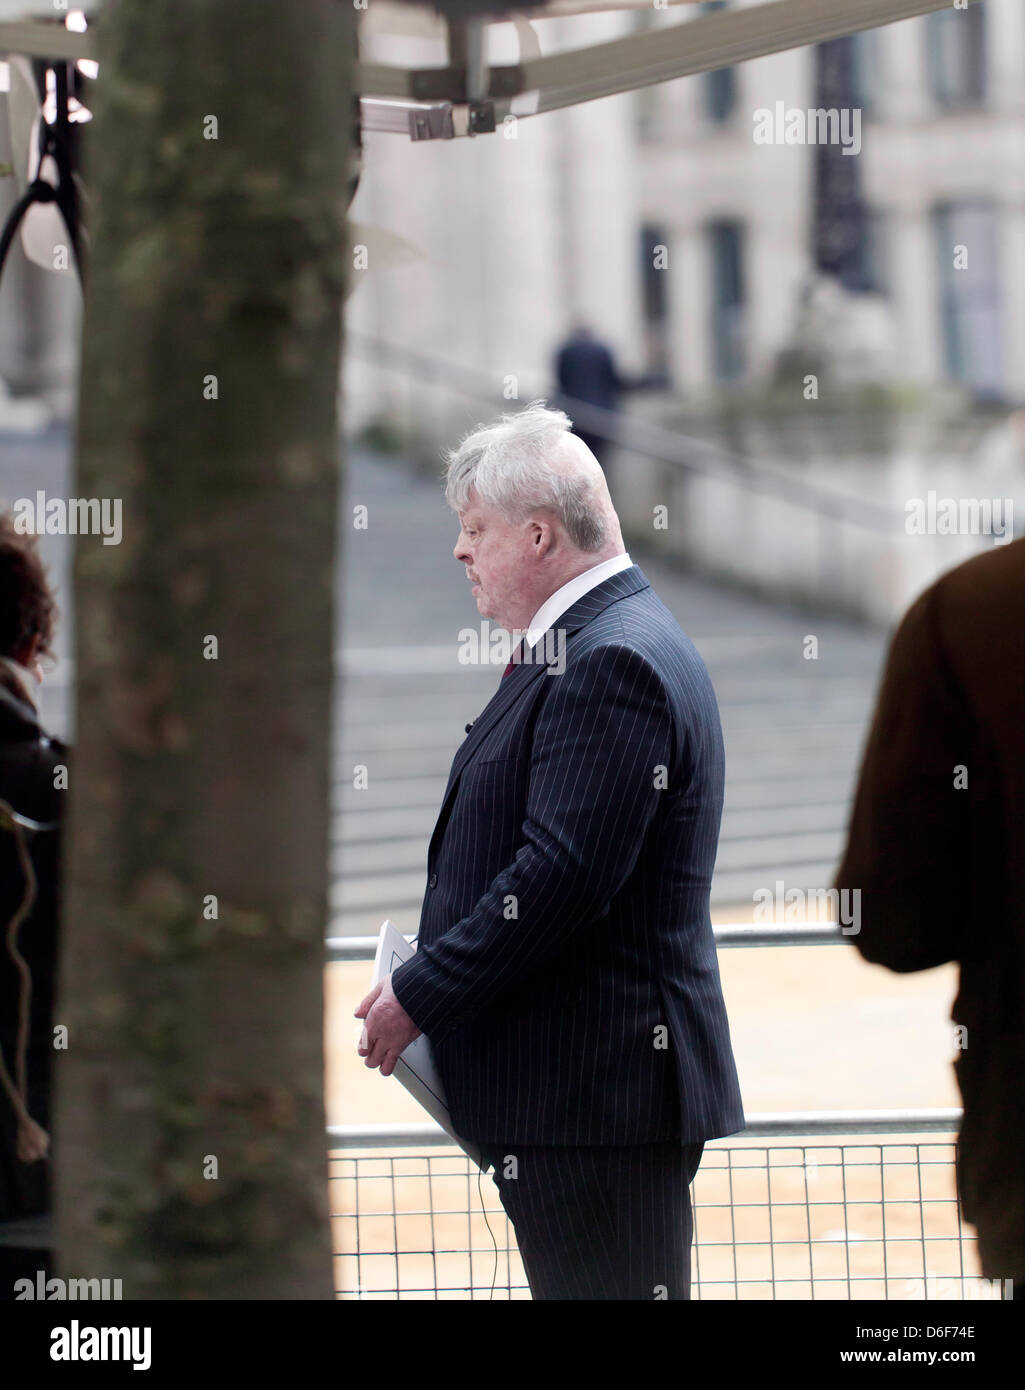 Falkland war hero and veteran Simon Weston being interviewed by the BBC outside St Paul's Cathedral after he attended Baroness Thatcher’s funeral on 17.04.2013. Stock Photo